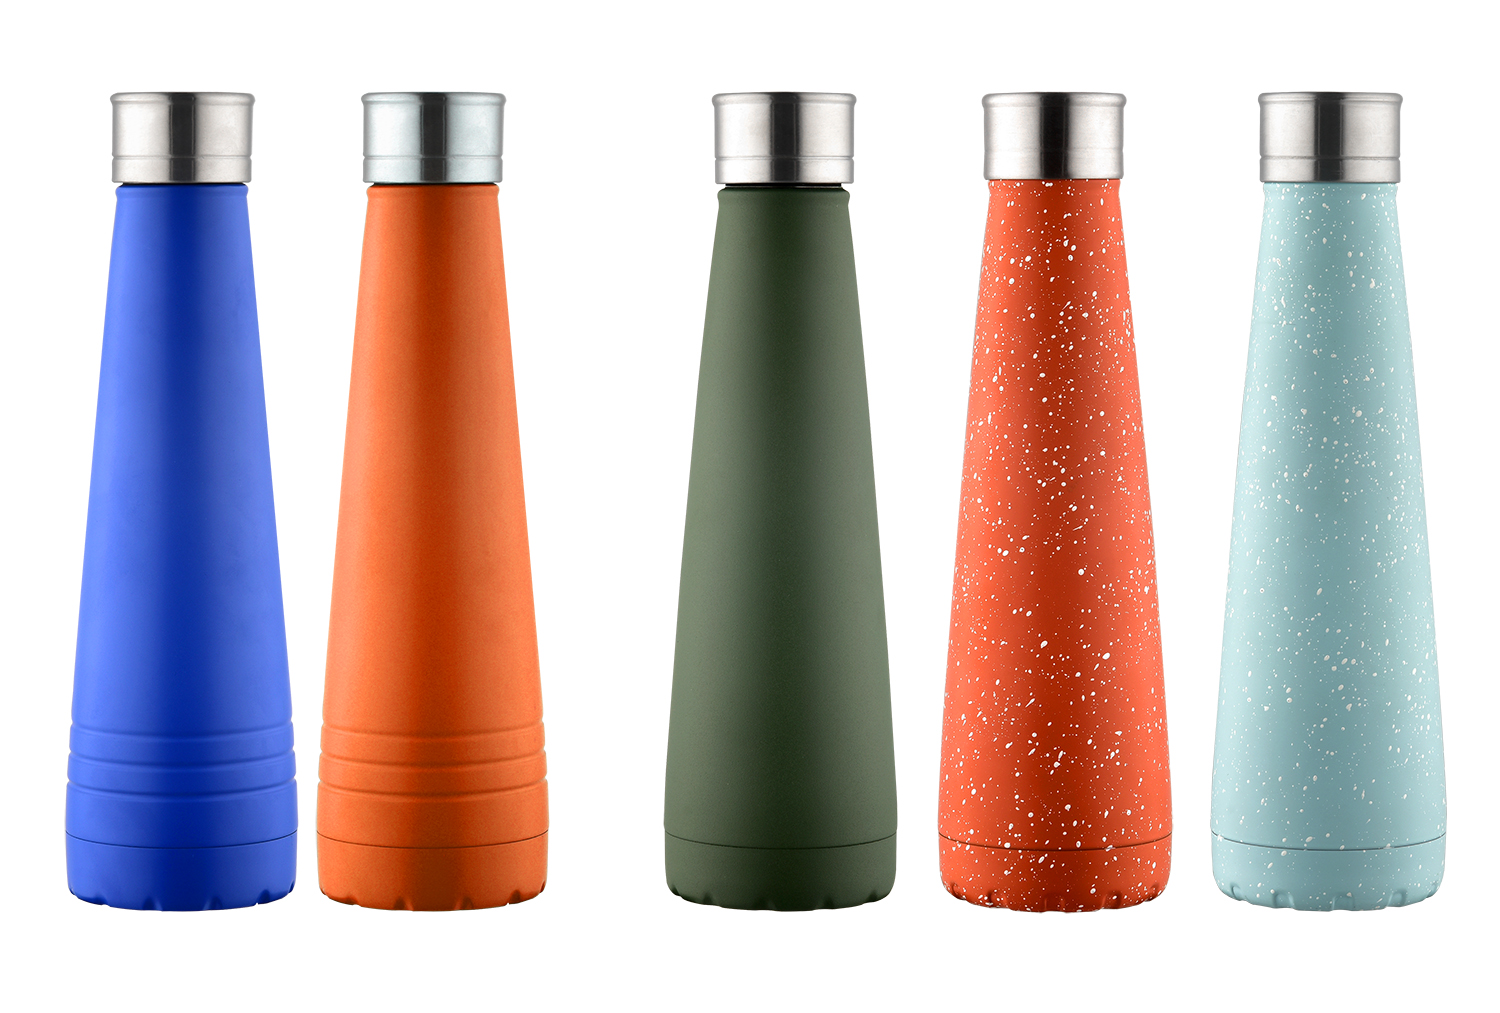 The Best Stainless Steel Thermos Cup for Keeping Your Drinks Hot or Cold